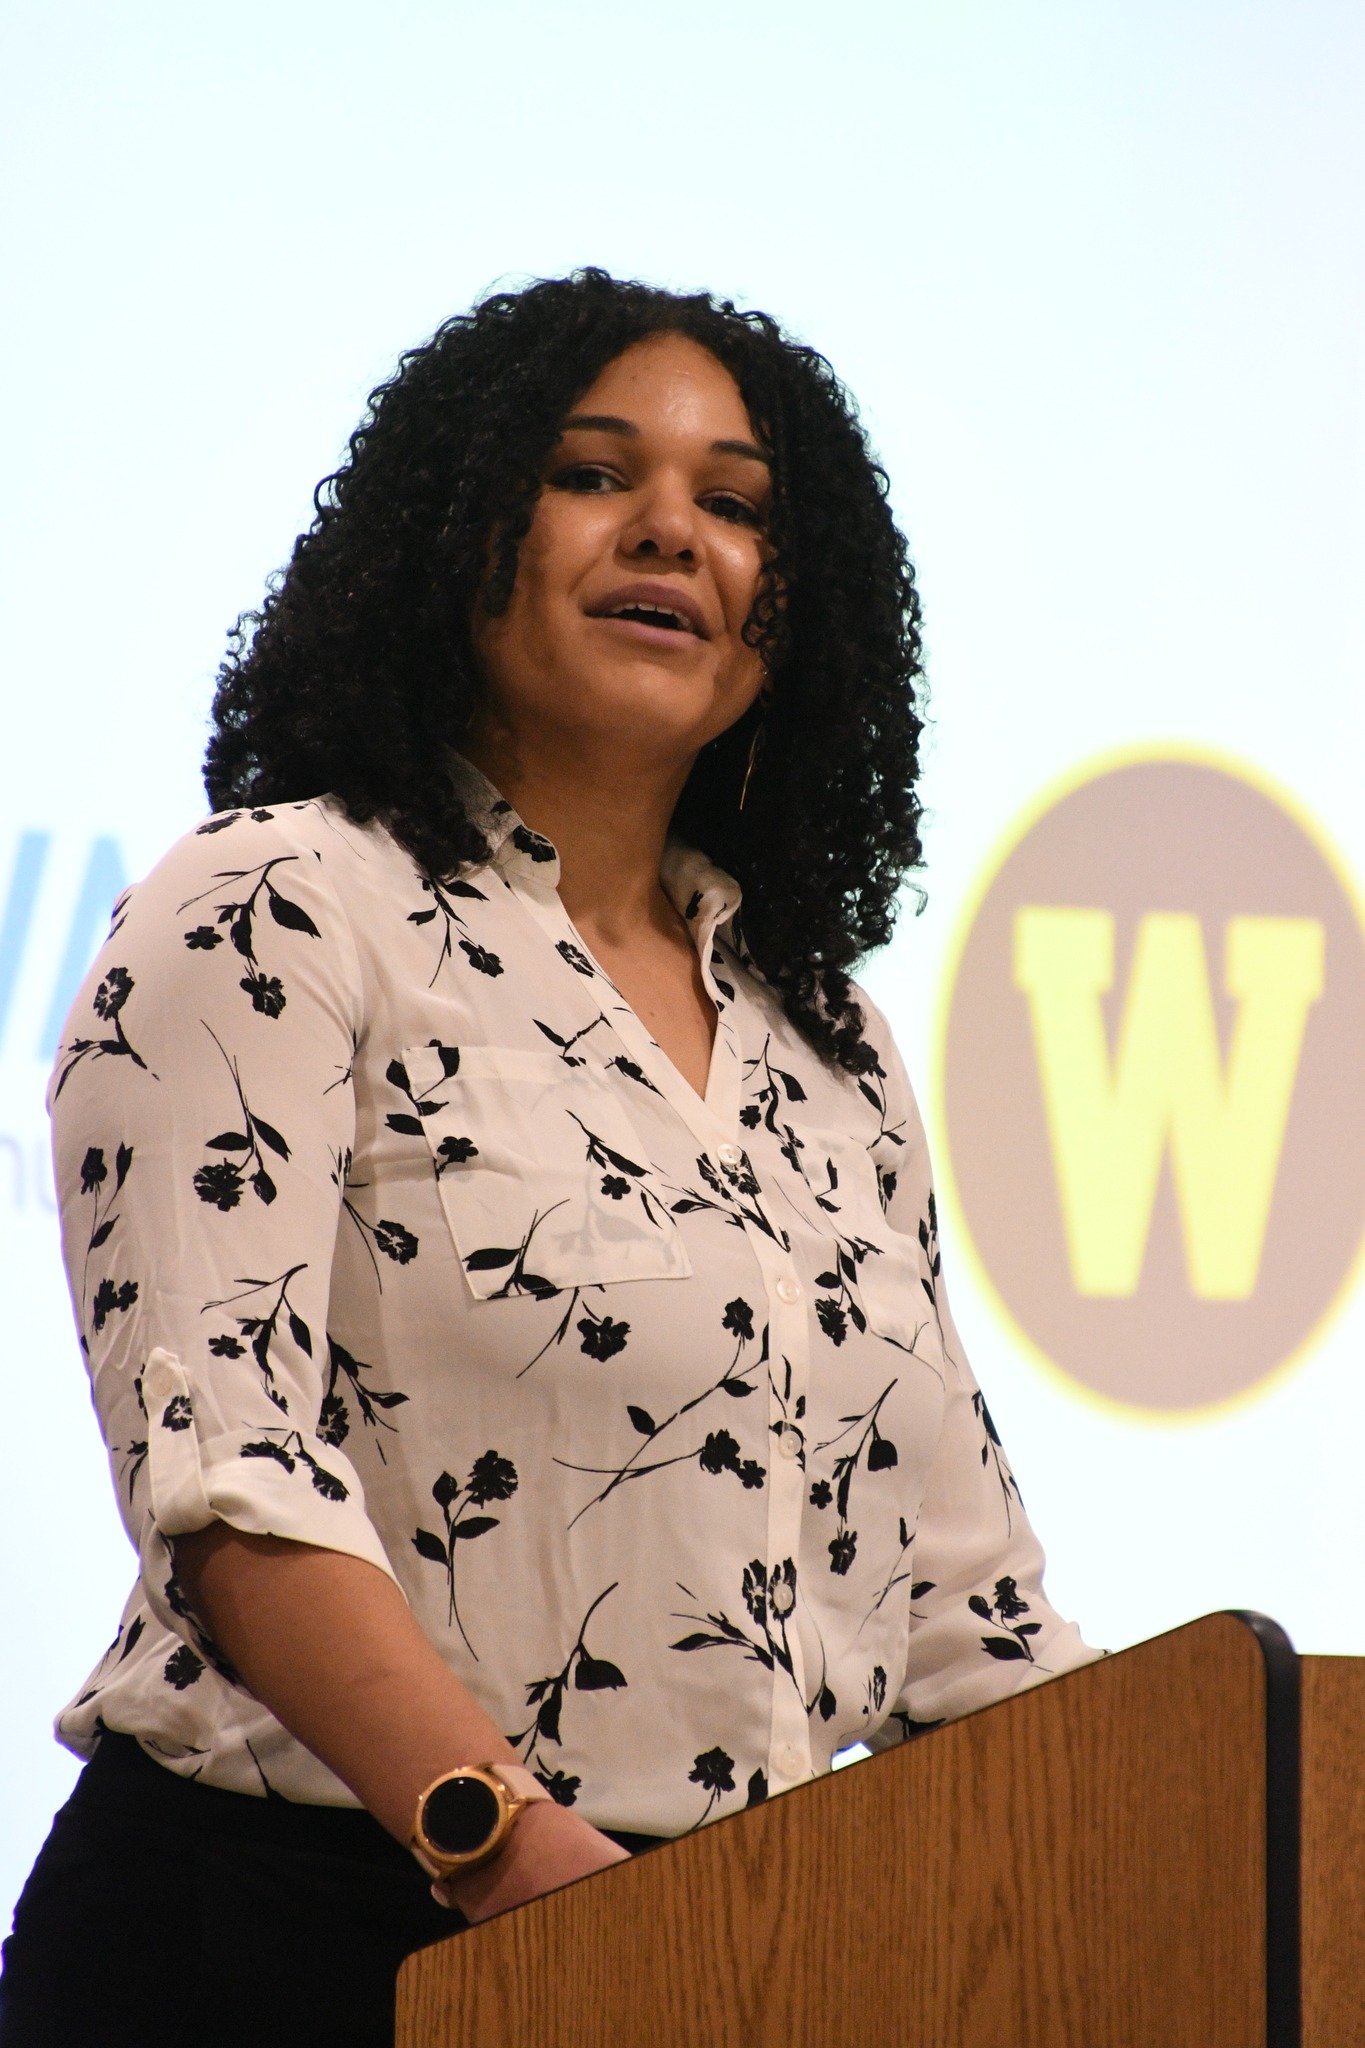 Kalamazoo Valley graduate and current WMU student Whitney Lewis spoke at the signing ceremony.